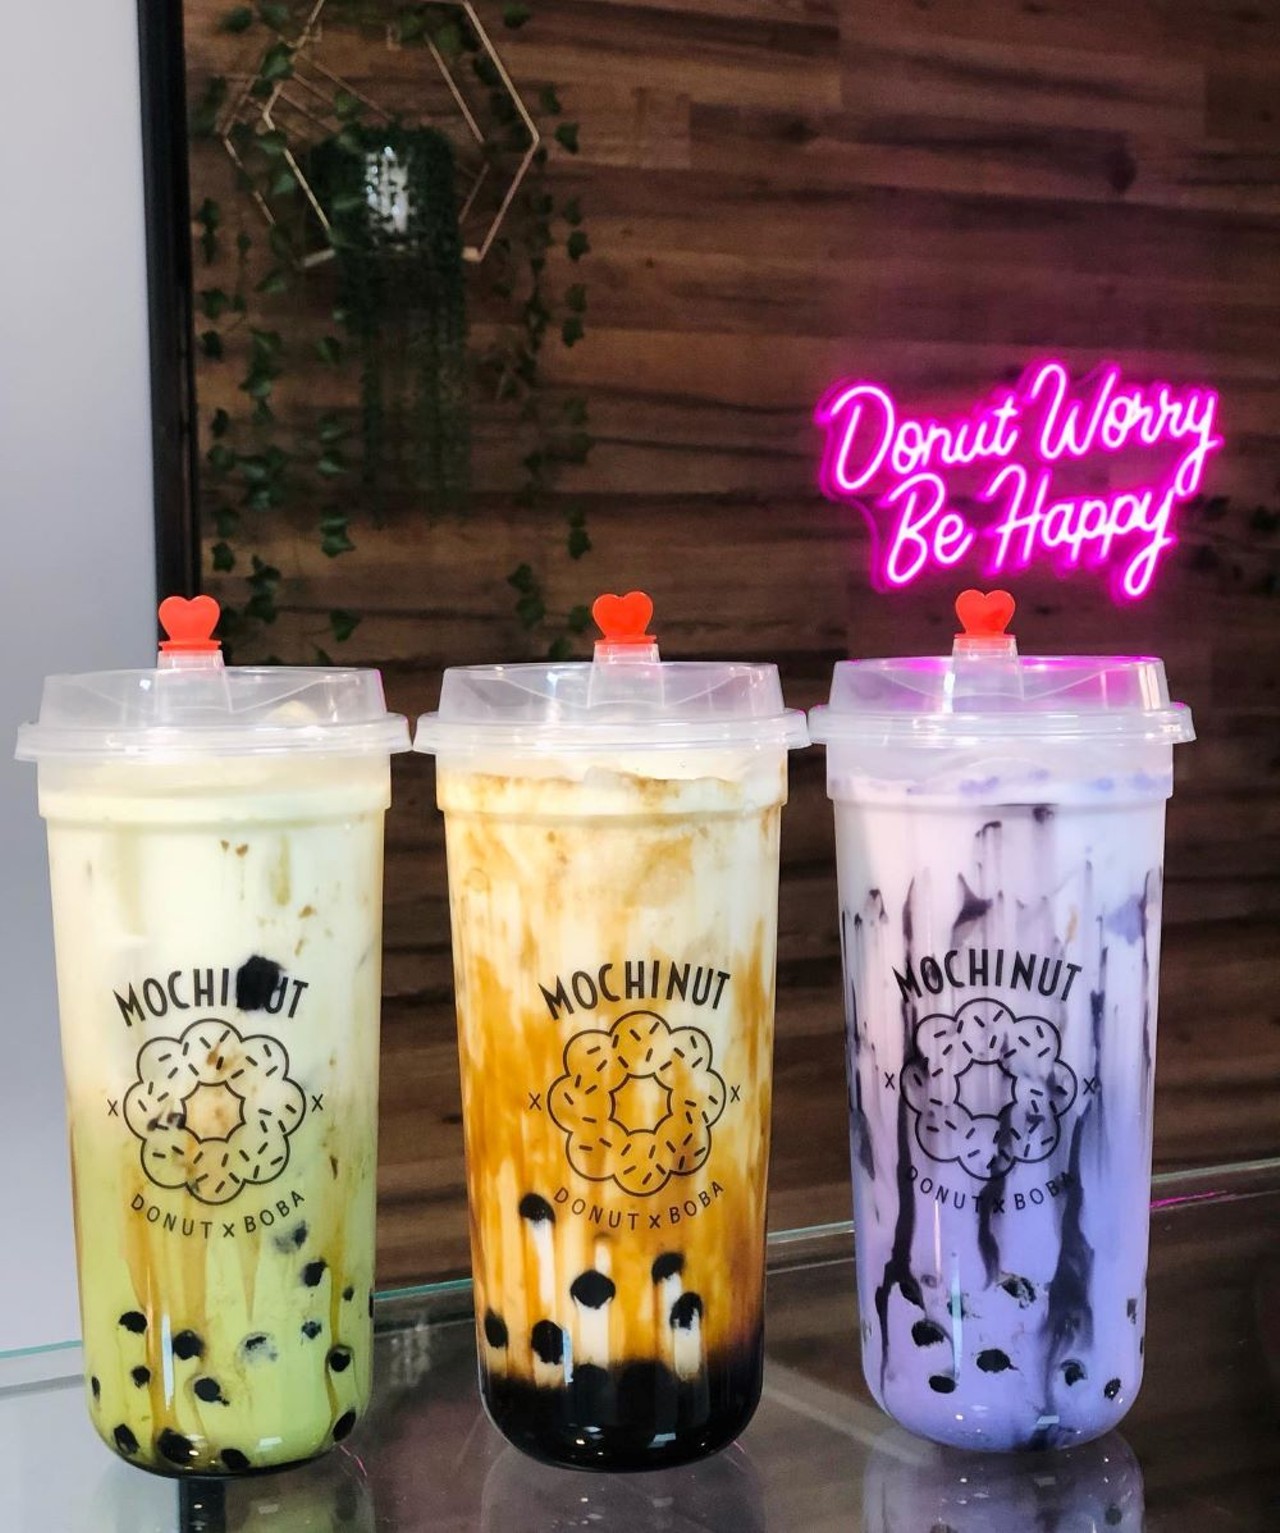 Mochinut
Locations in Pinellas Park & Temple Terrace
While there’s dozens of these franchised chains throughout the country, Mochinut’s Tampa Bay storefronts still sling boba comparable to other local cafes. Some come for the rotating flavors of mochi doughnuts and Korean-style, cheese-stuffed corn dogs, while others gravitate towards its ube, matcha or brown sugar milk teas. 
Photo via Mochinut/Facebook